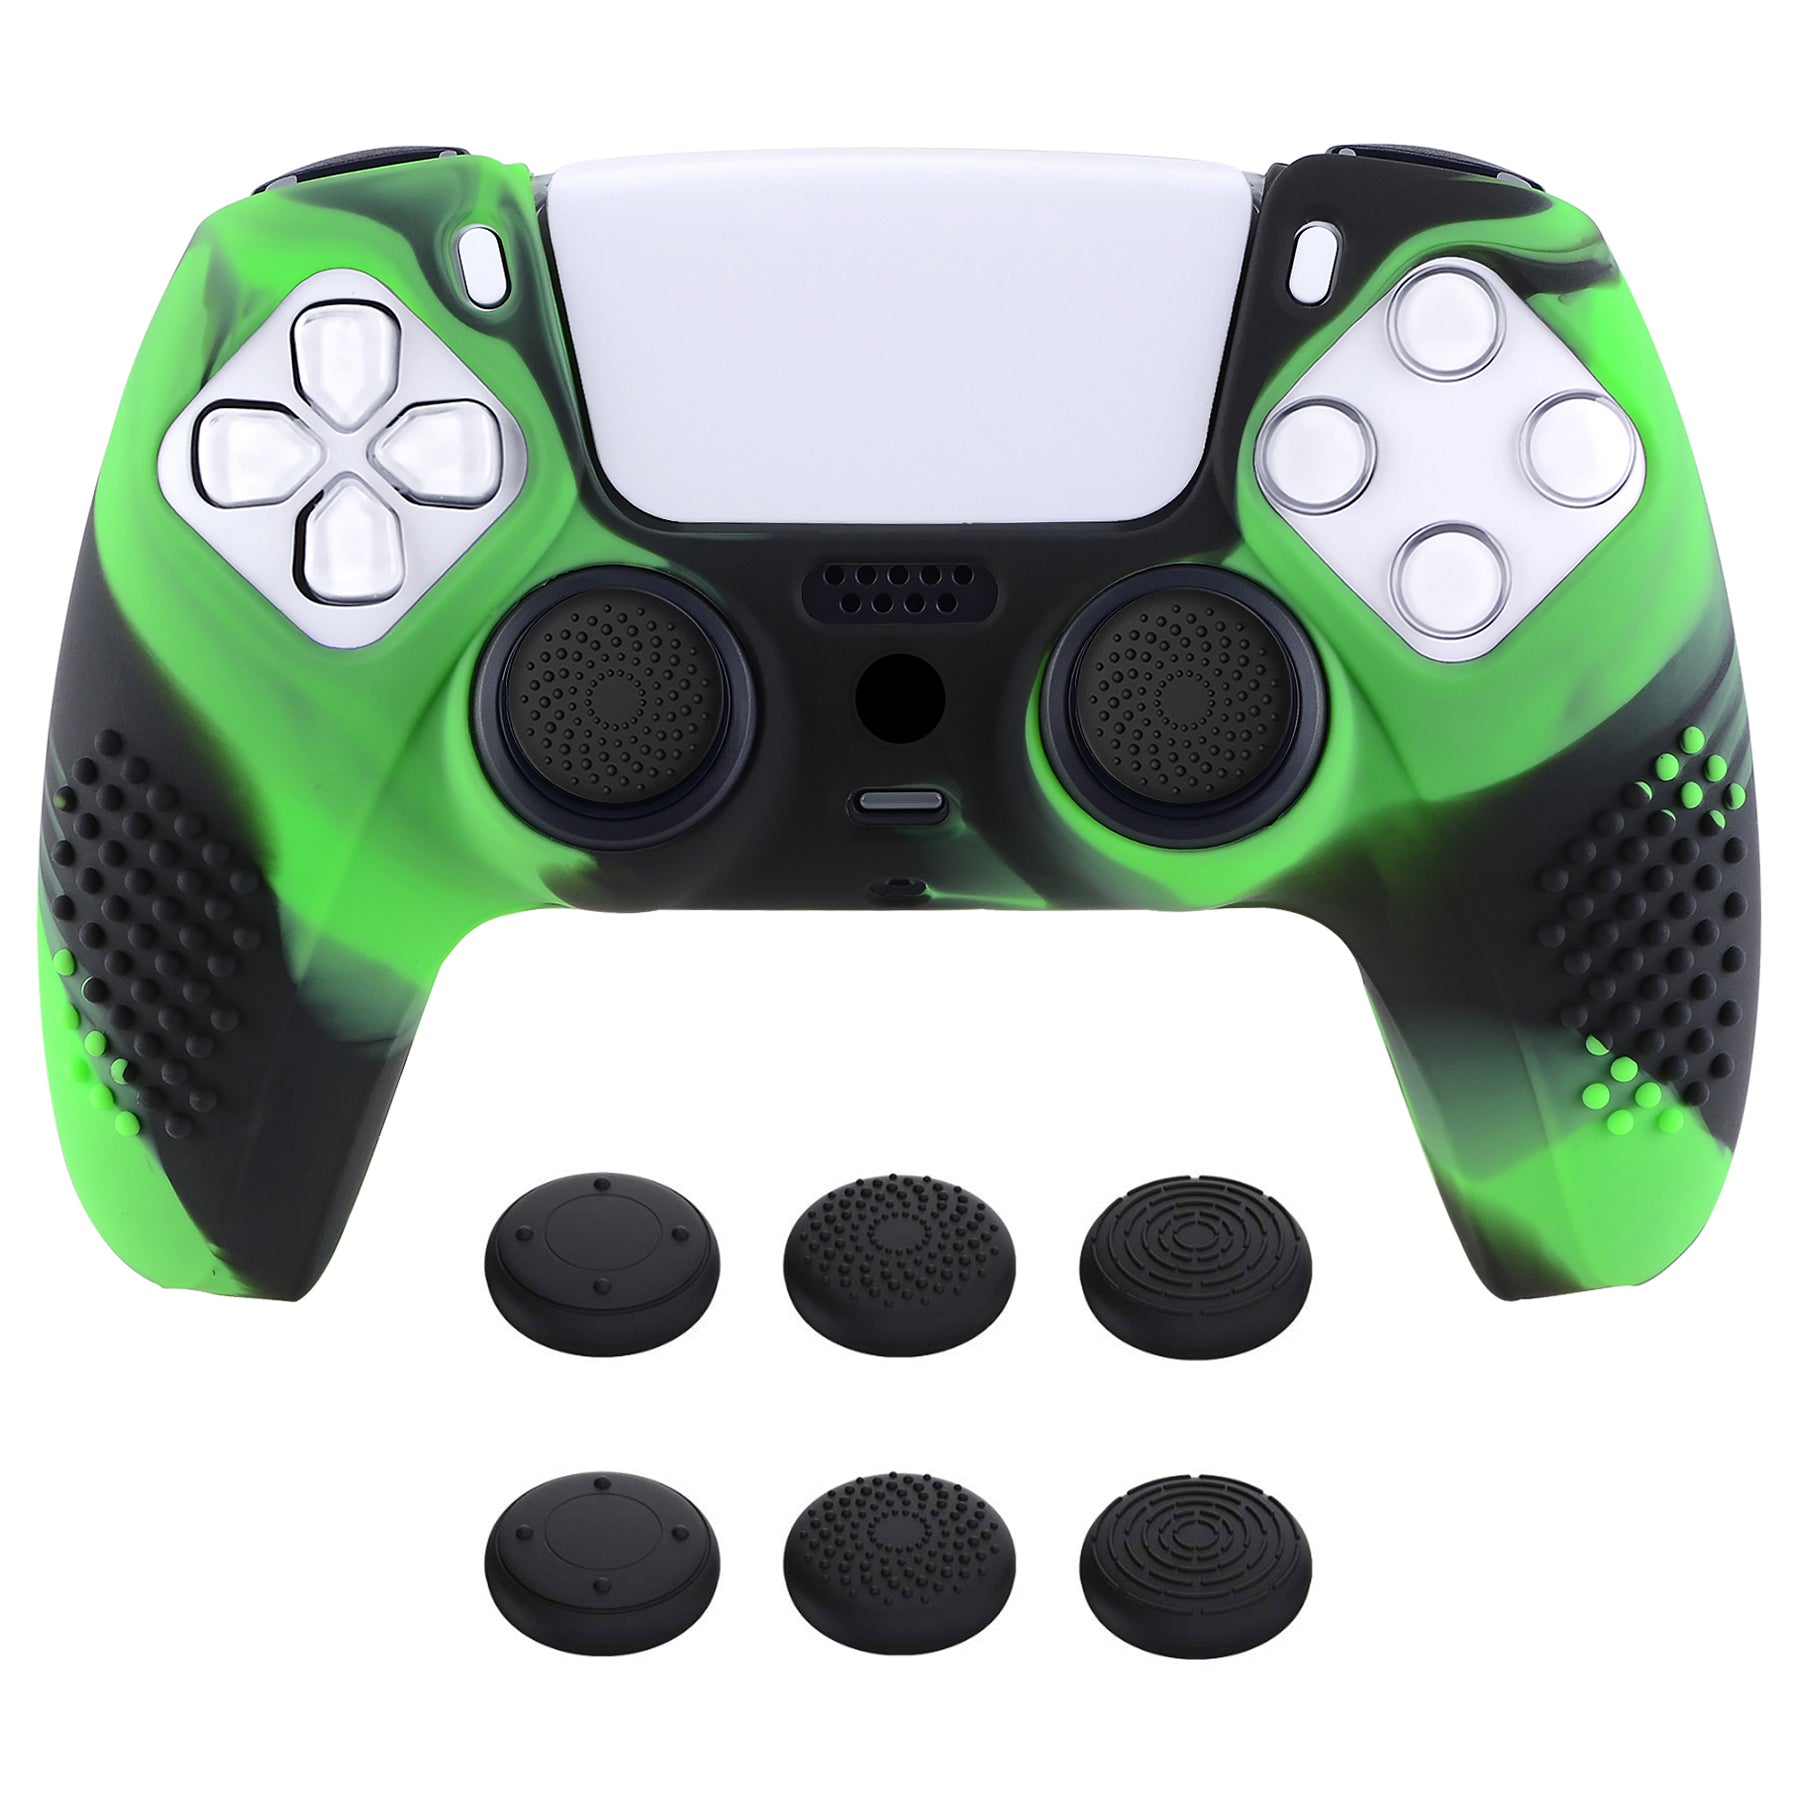 PlayVital 3D Studded Edition Anti-Slip Silicone Cover Skin with Thumb Grip Caps for PS5 Wireless Controller - Green & Black - TDPF024 PlayVital